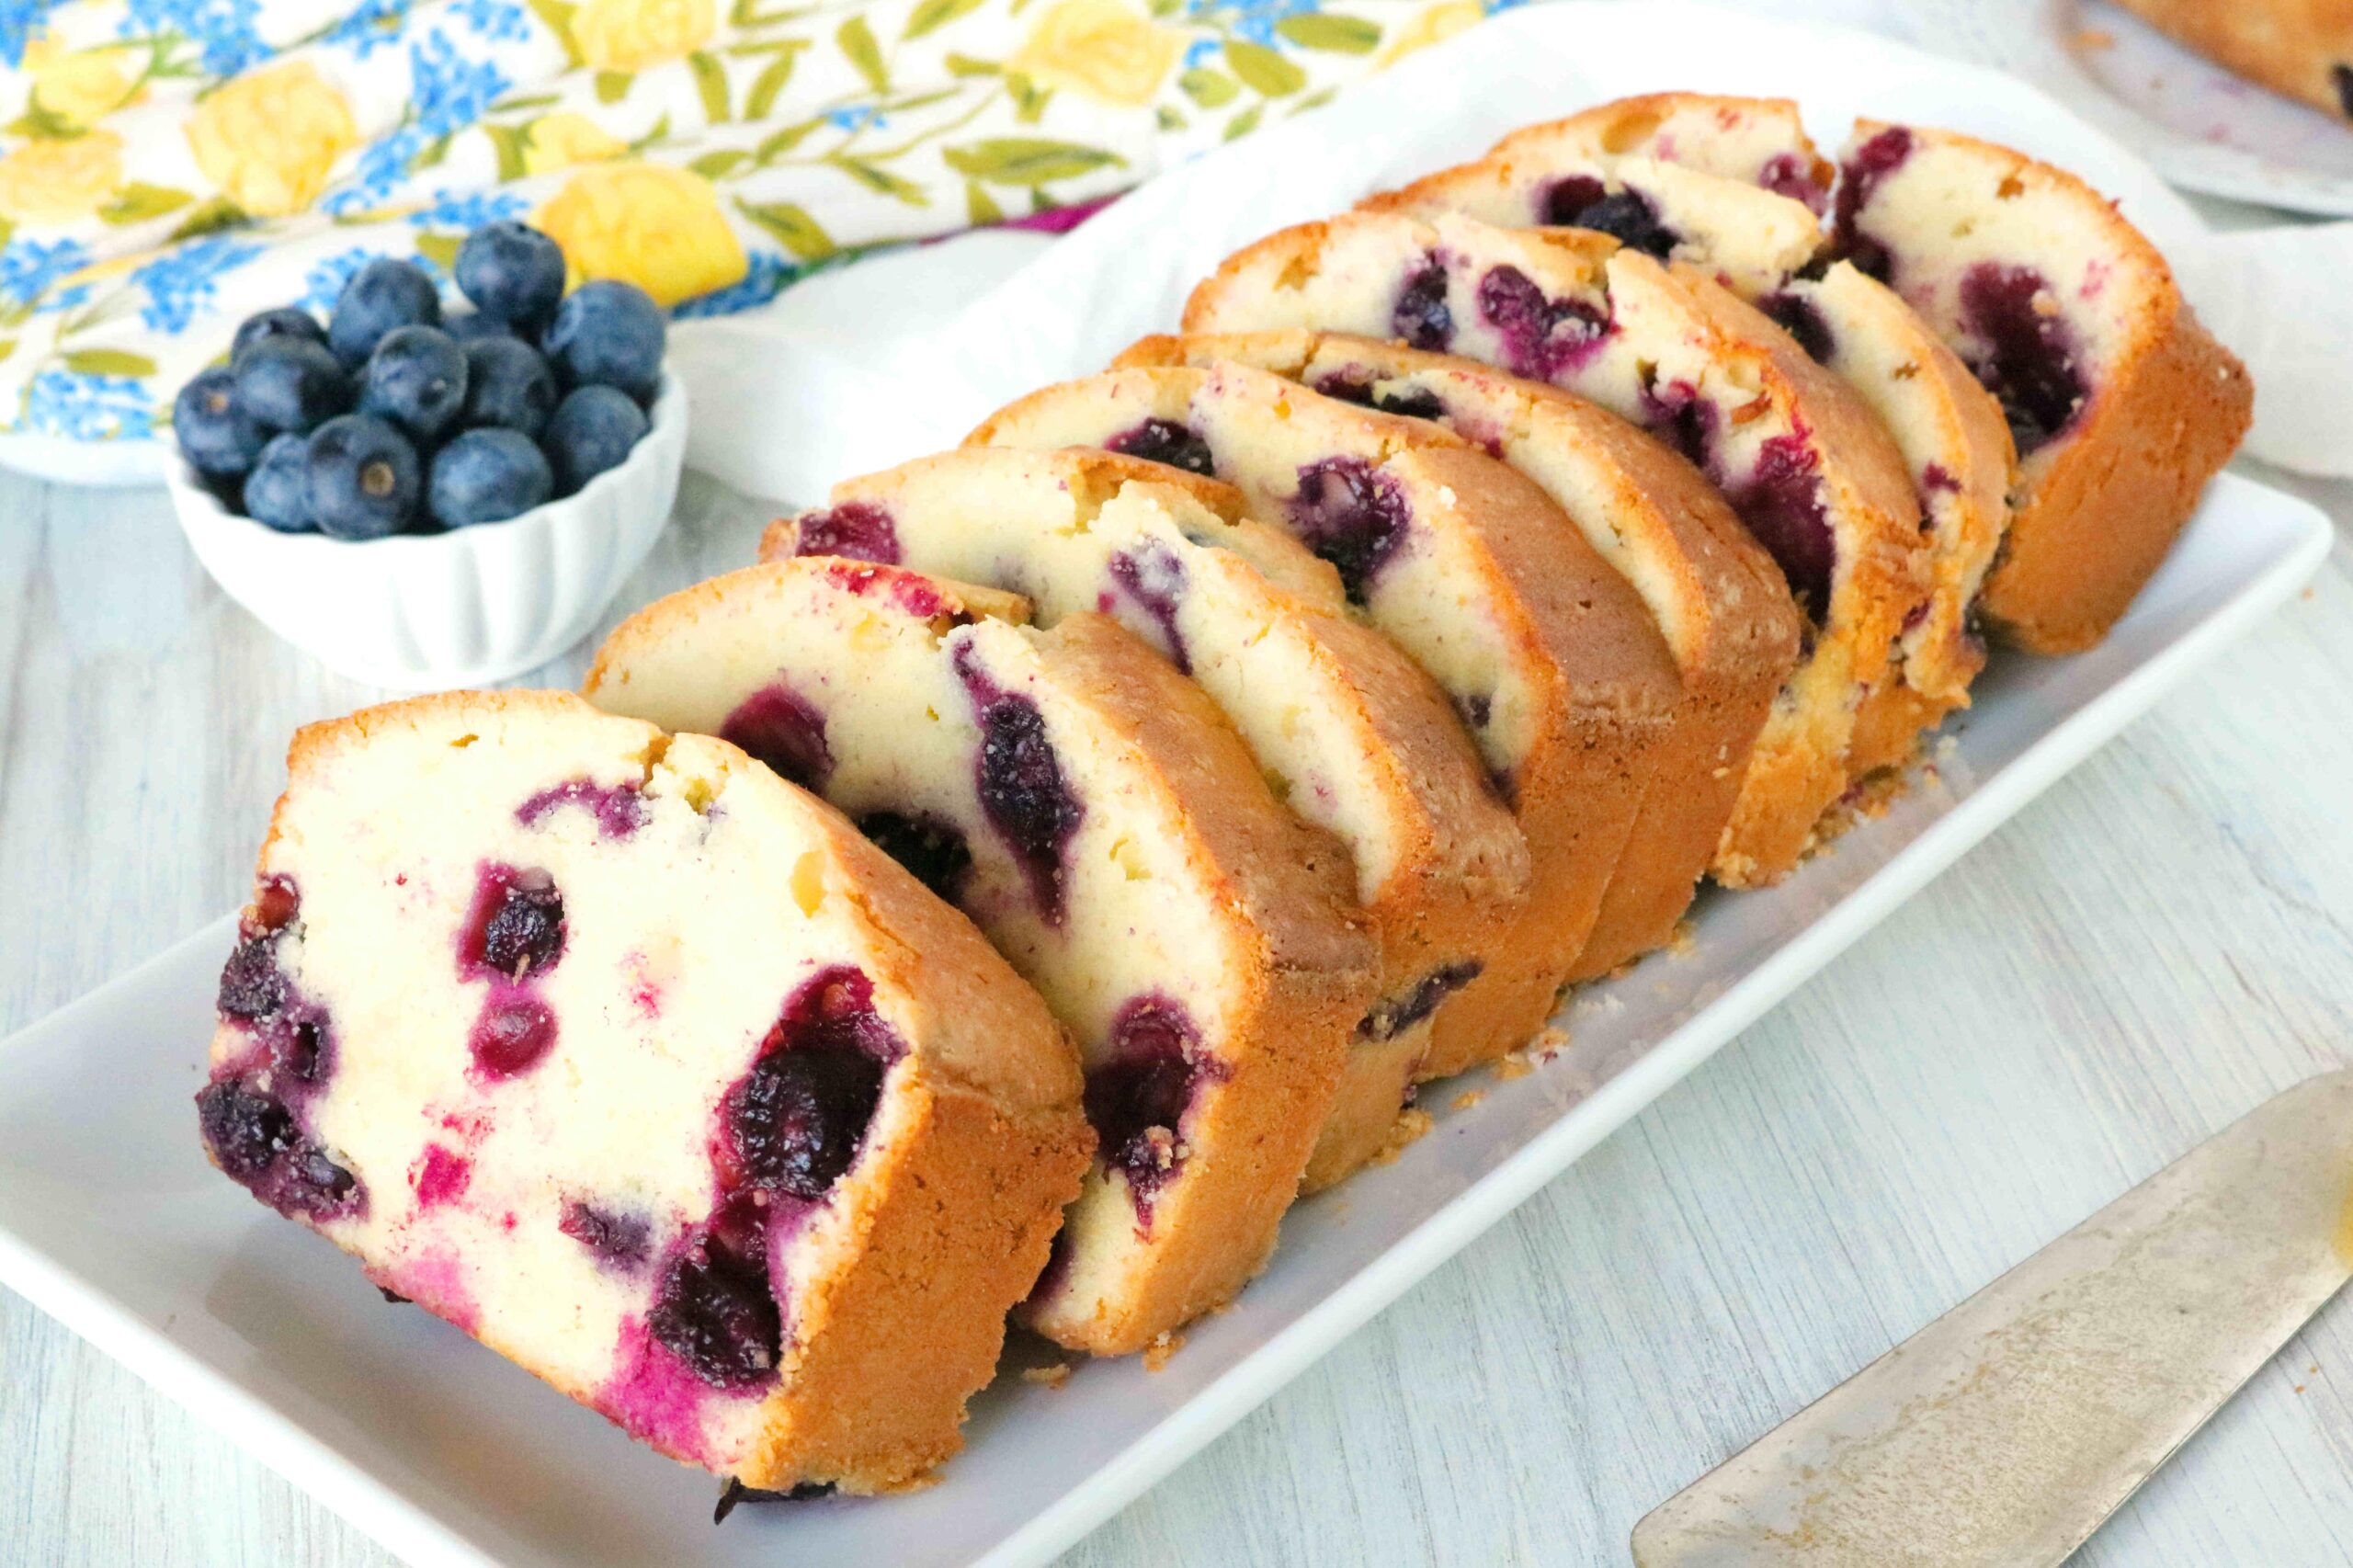  Lemon and berries? That's a match made in heaven!